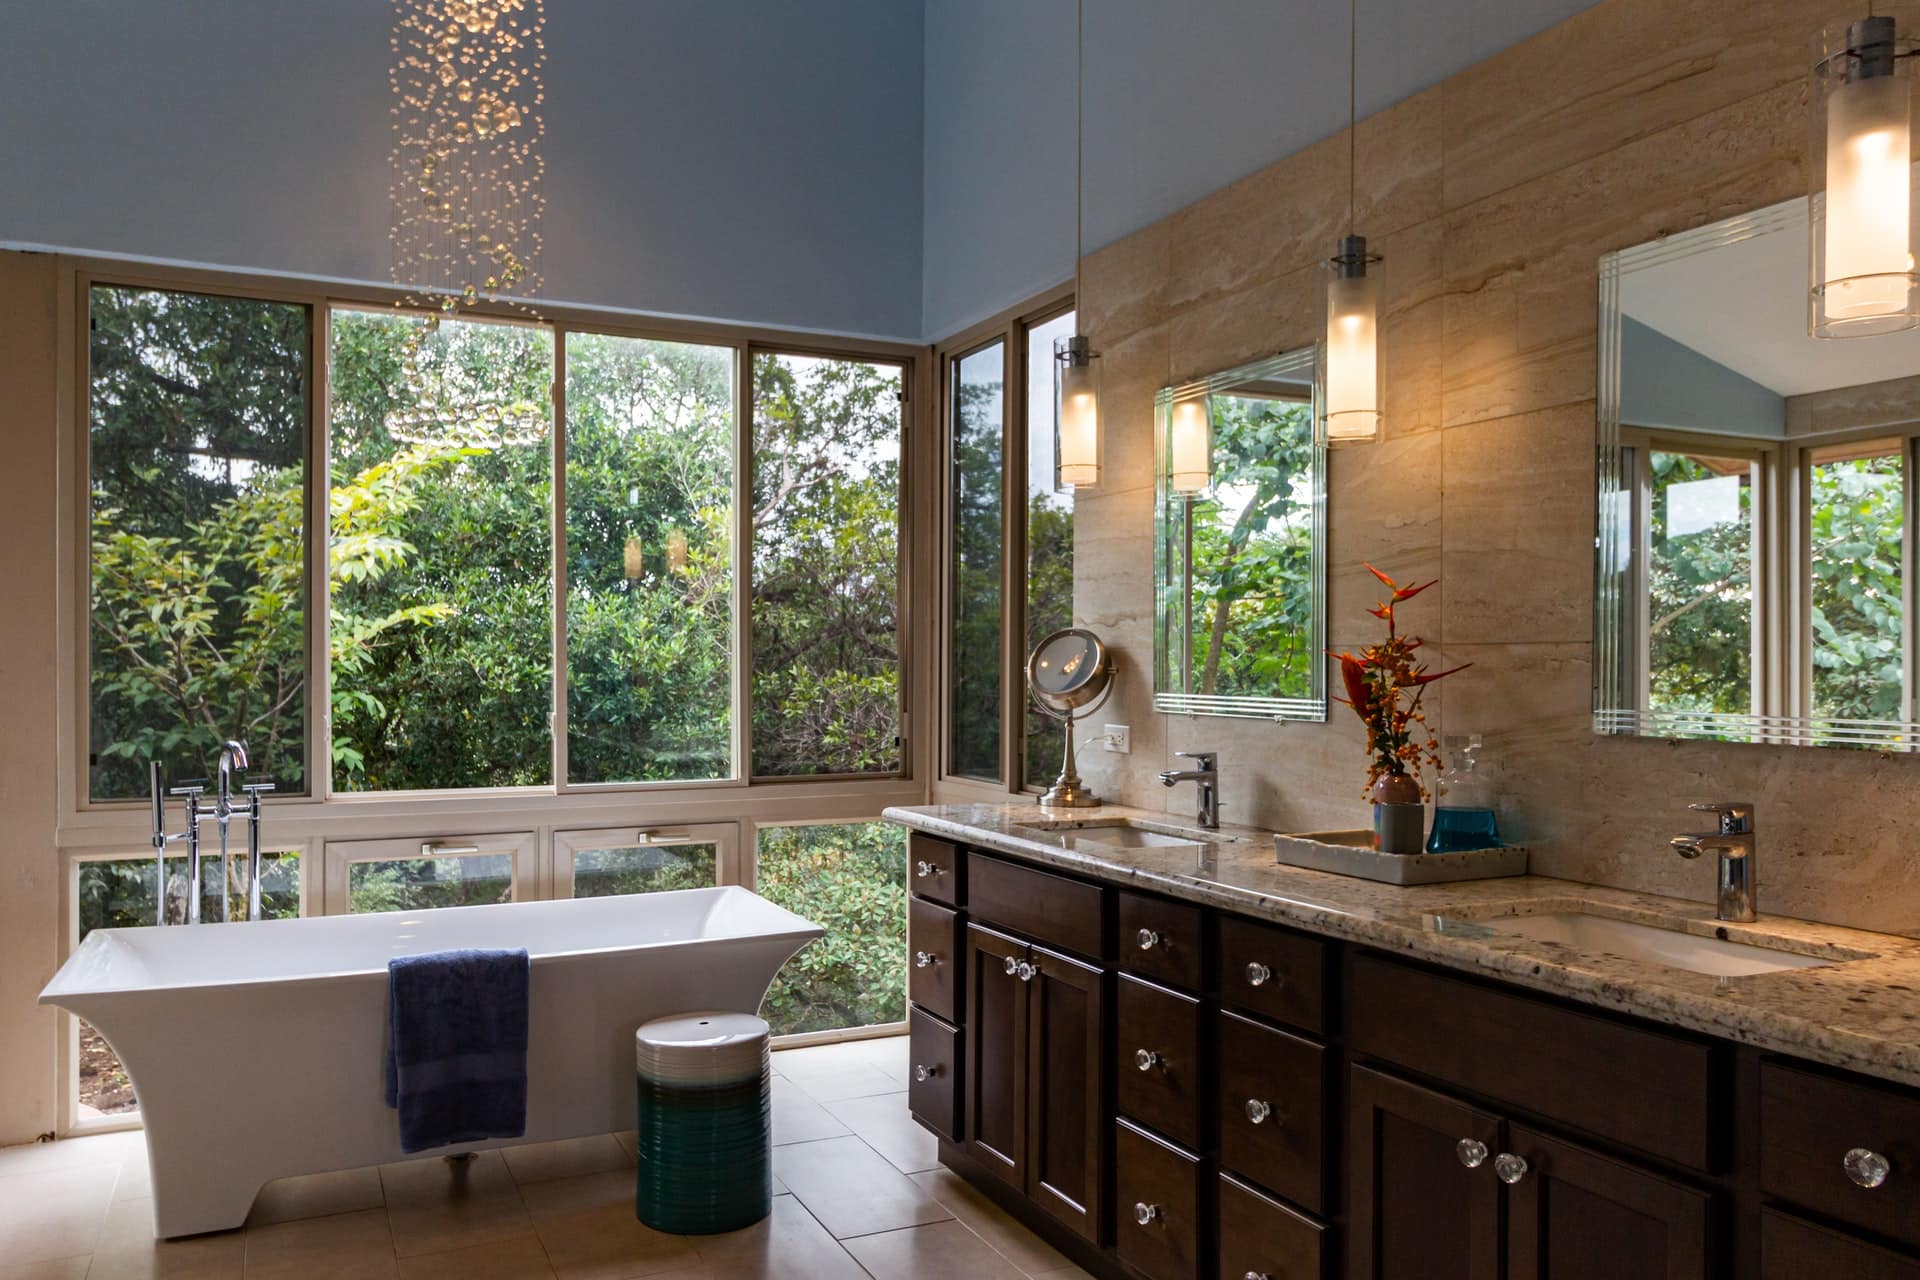 Which Are The Best Bathroom Wall Options For Your Remodel?